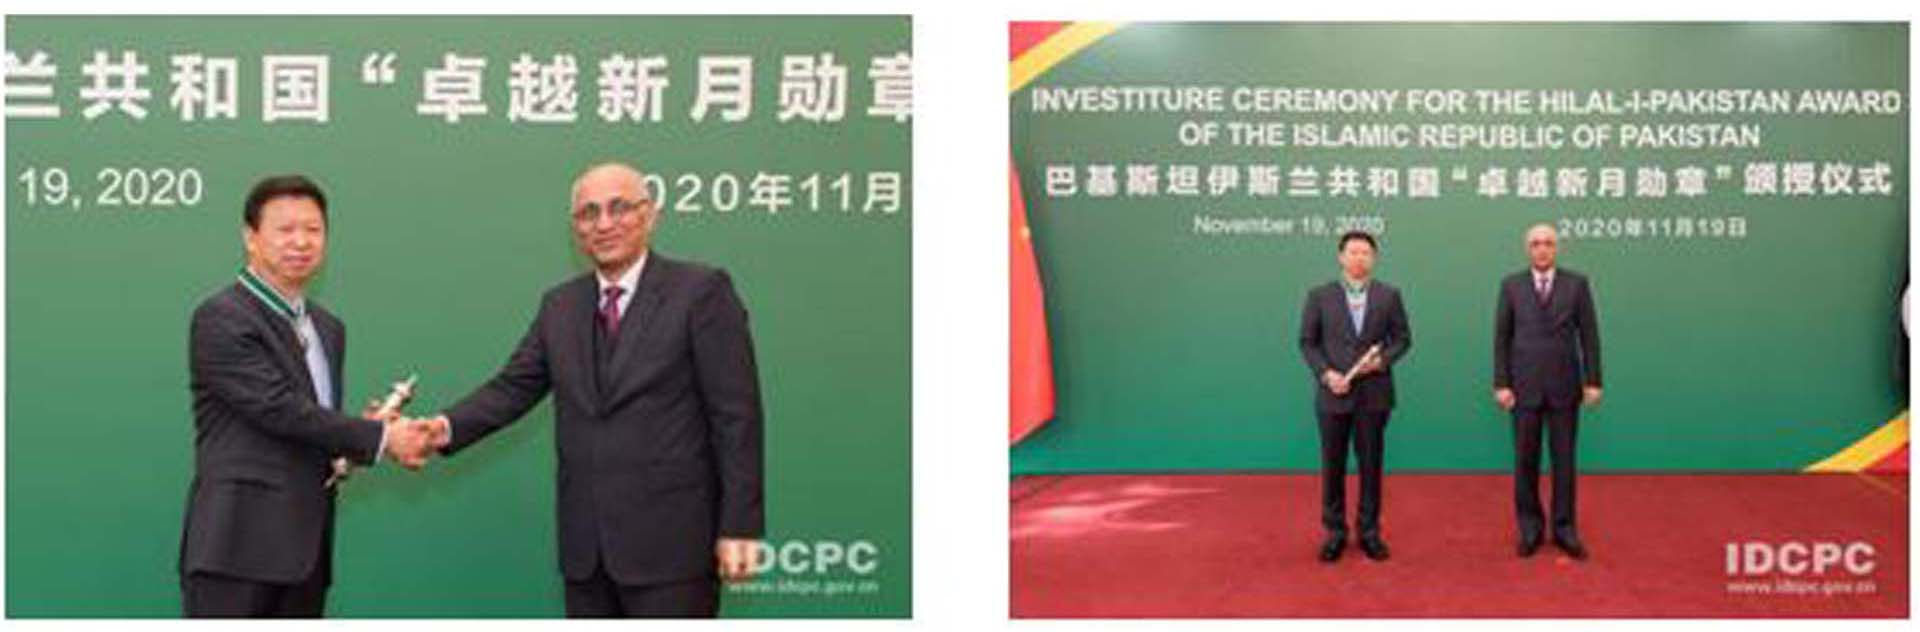 Pakistan Conferred the Civil Award to China’s IDCPC Minister Song Tao